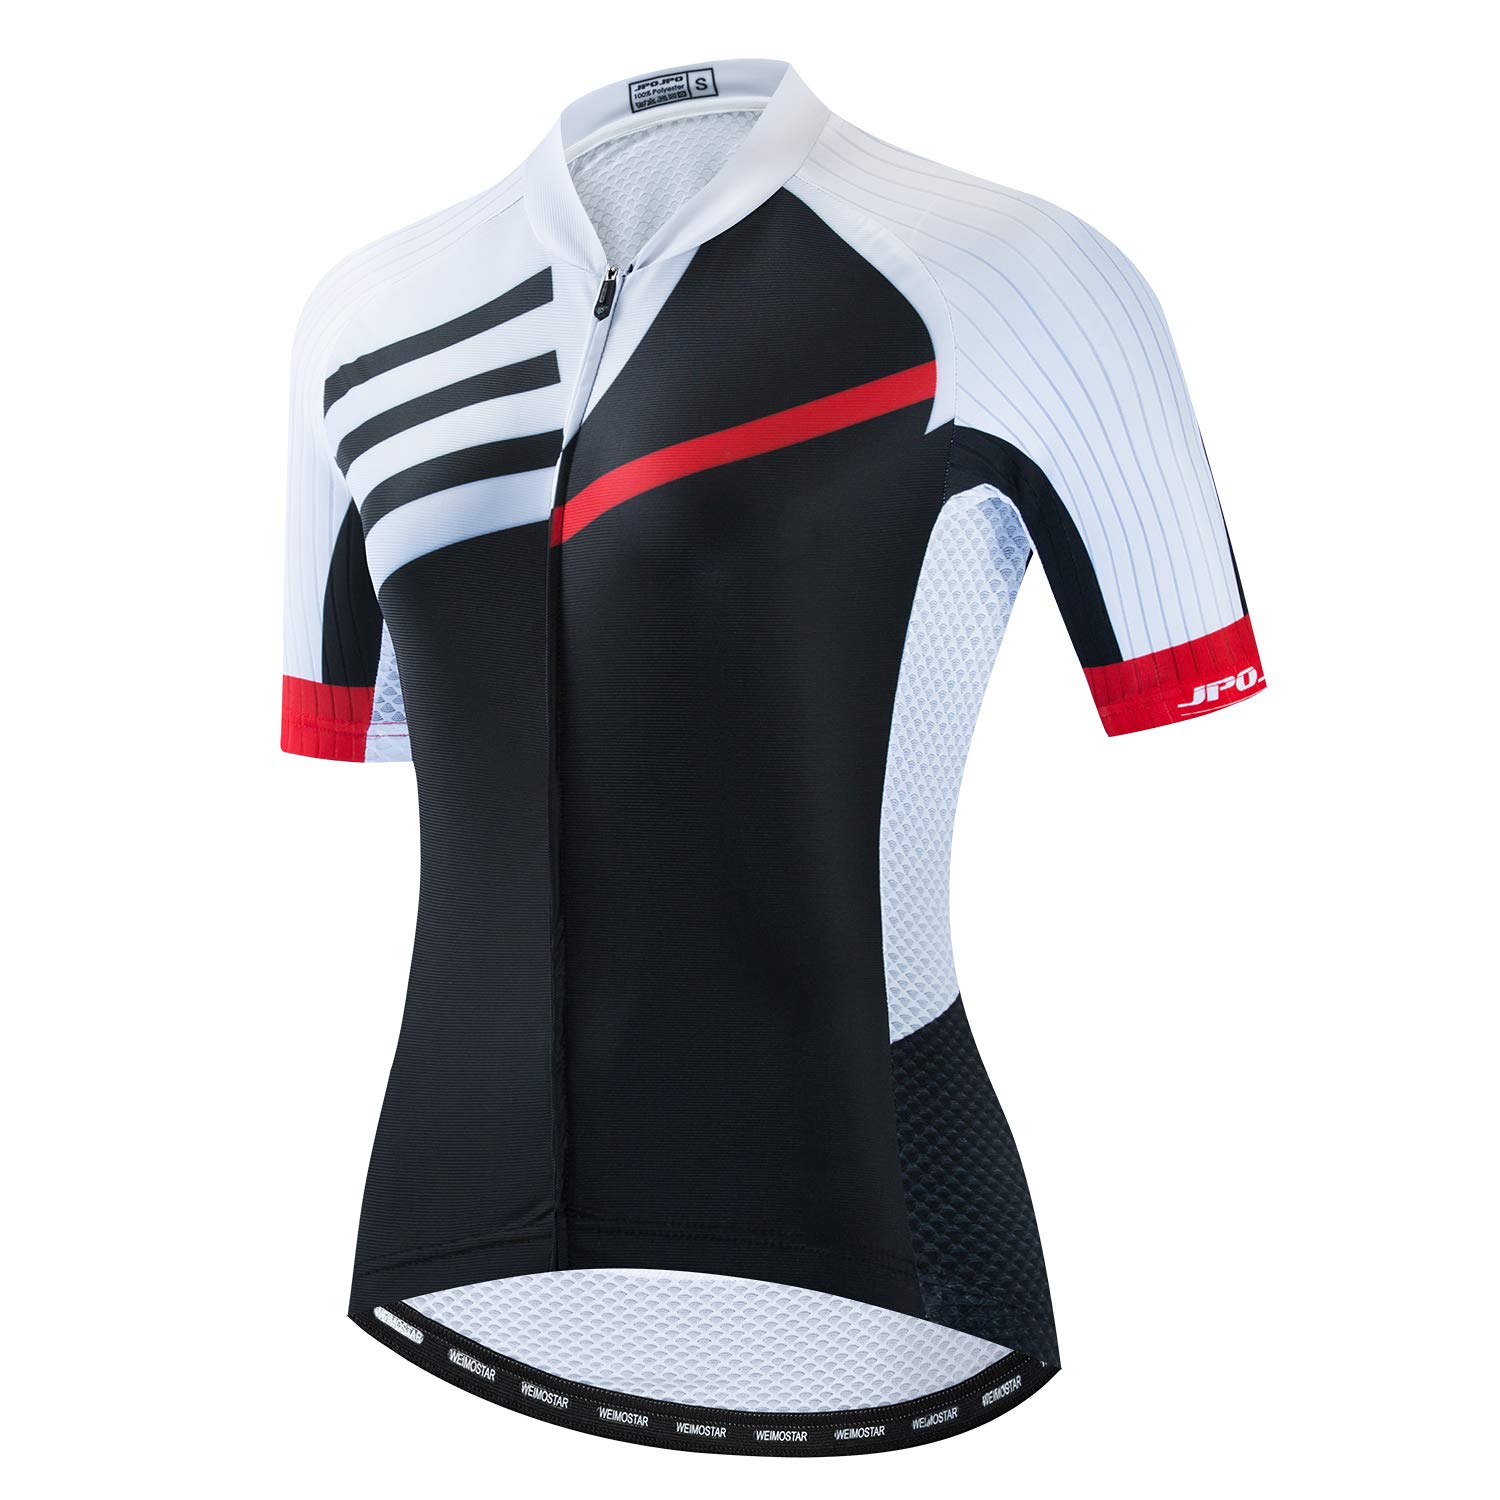 Weimostar Cycling Jersey Women Bike Shirt Top Pro Team Summer Short Sleeve MTB Bicycle Clothing Pockets Black Red Size M